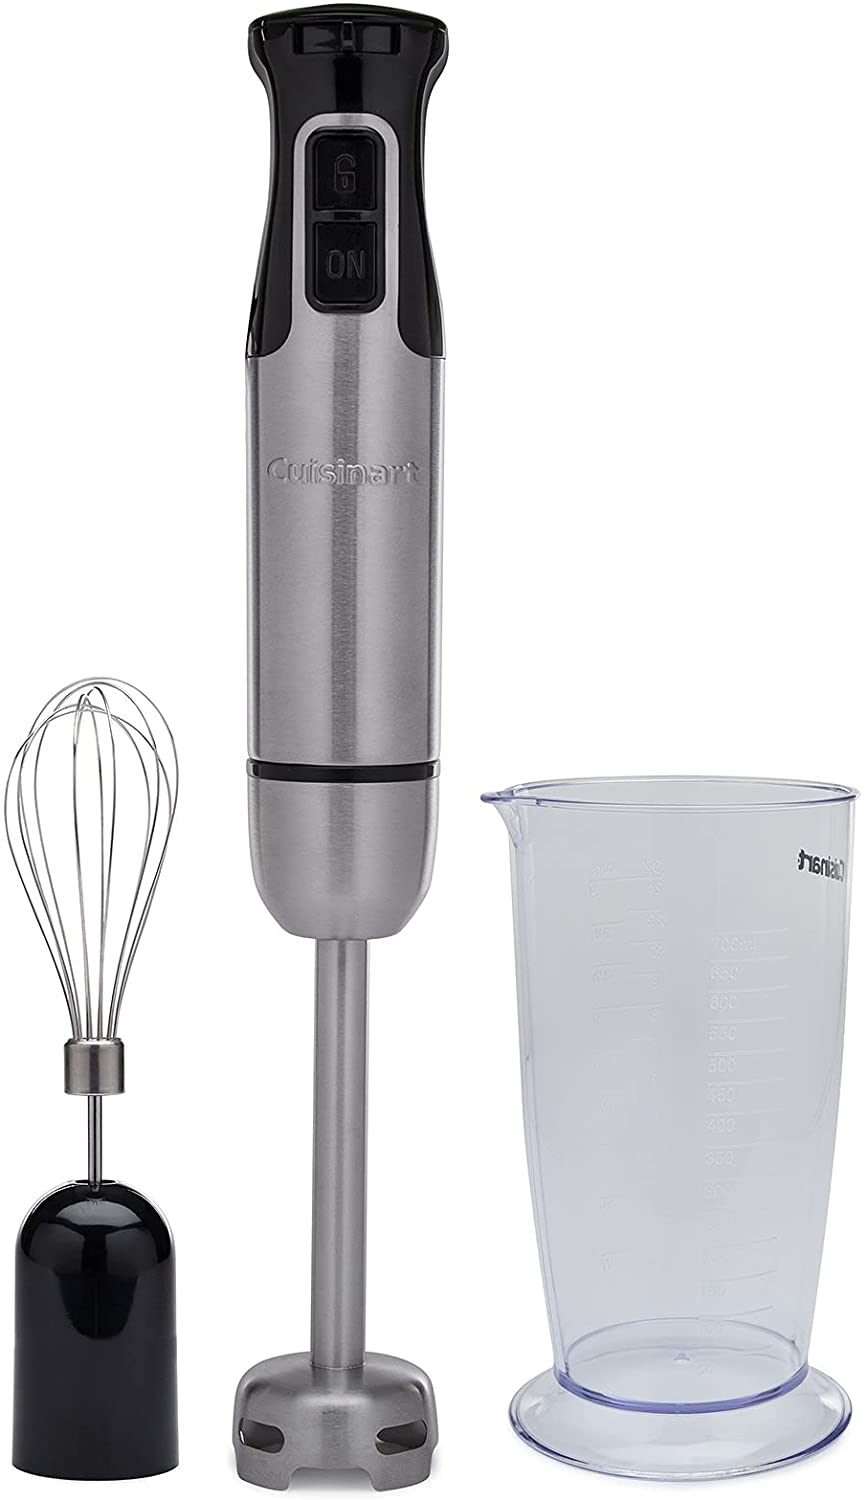 Cuisinart Quick Prep Stick Hand Blender CSB- 2 with stand . 2